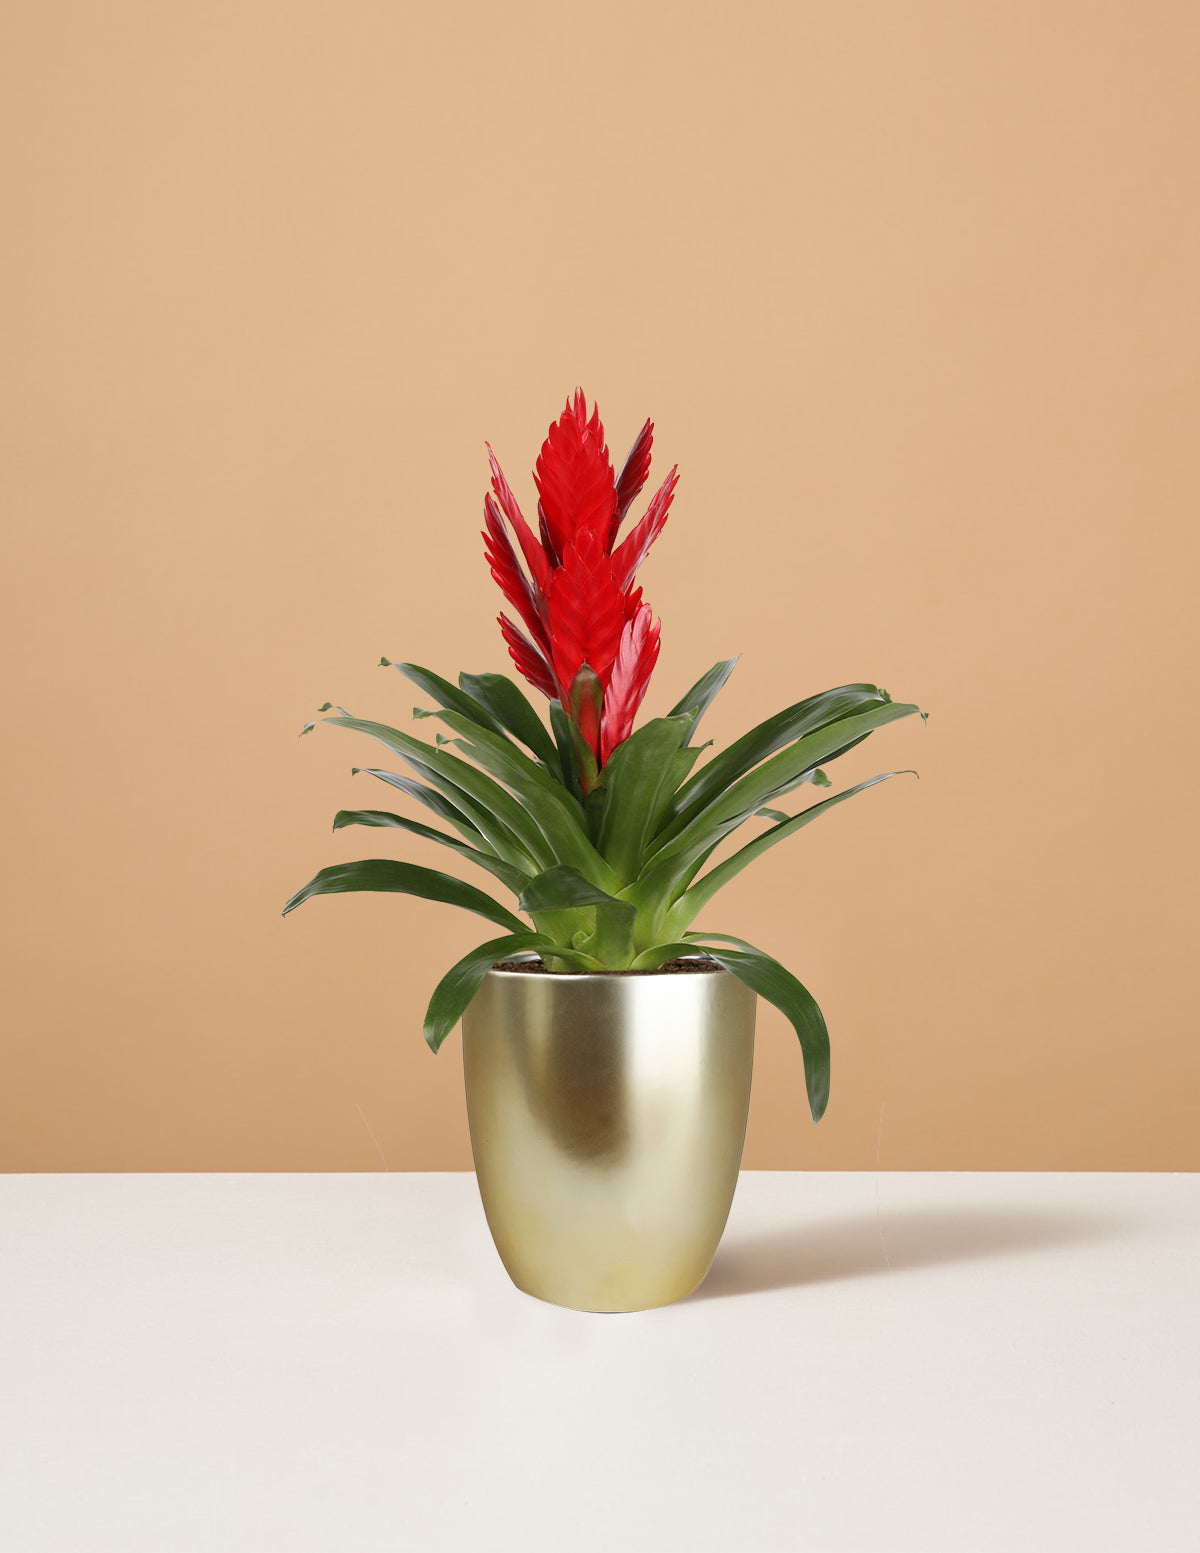 for The Delivery Intenso | Vriesea | Sill Red Houseplants Bromeliad Flowering